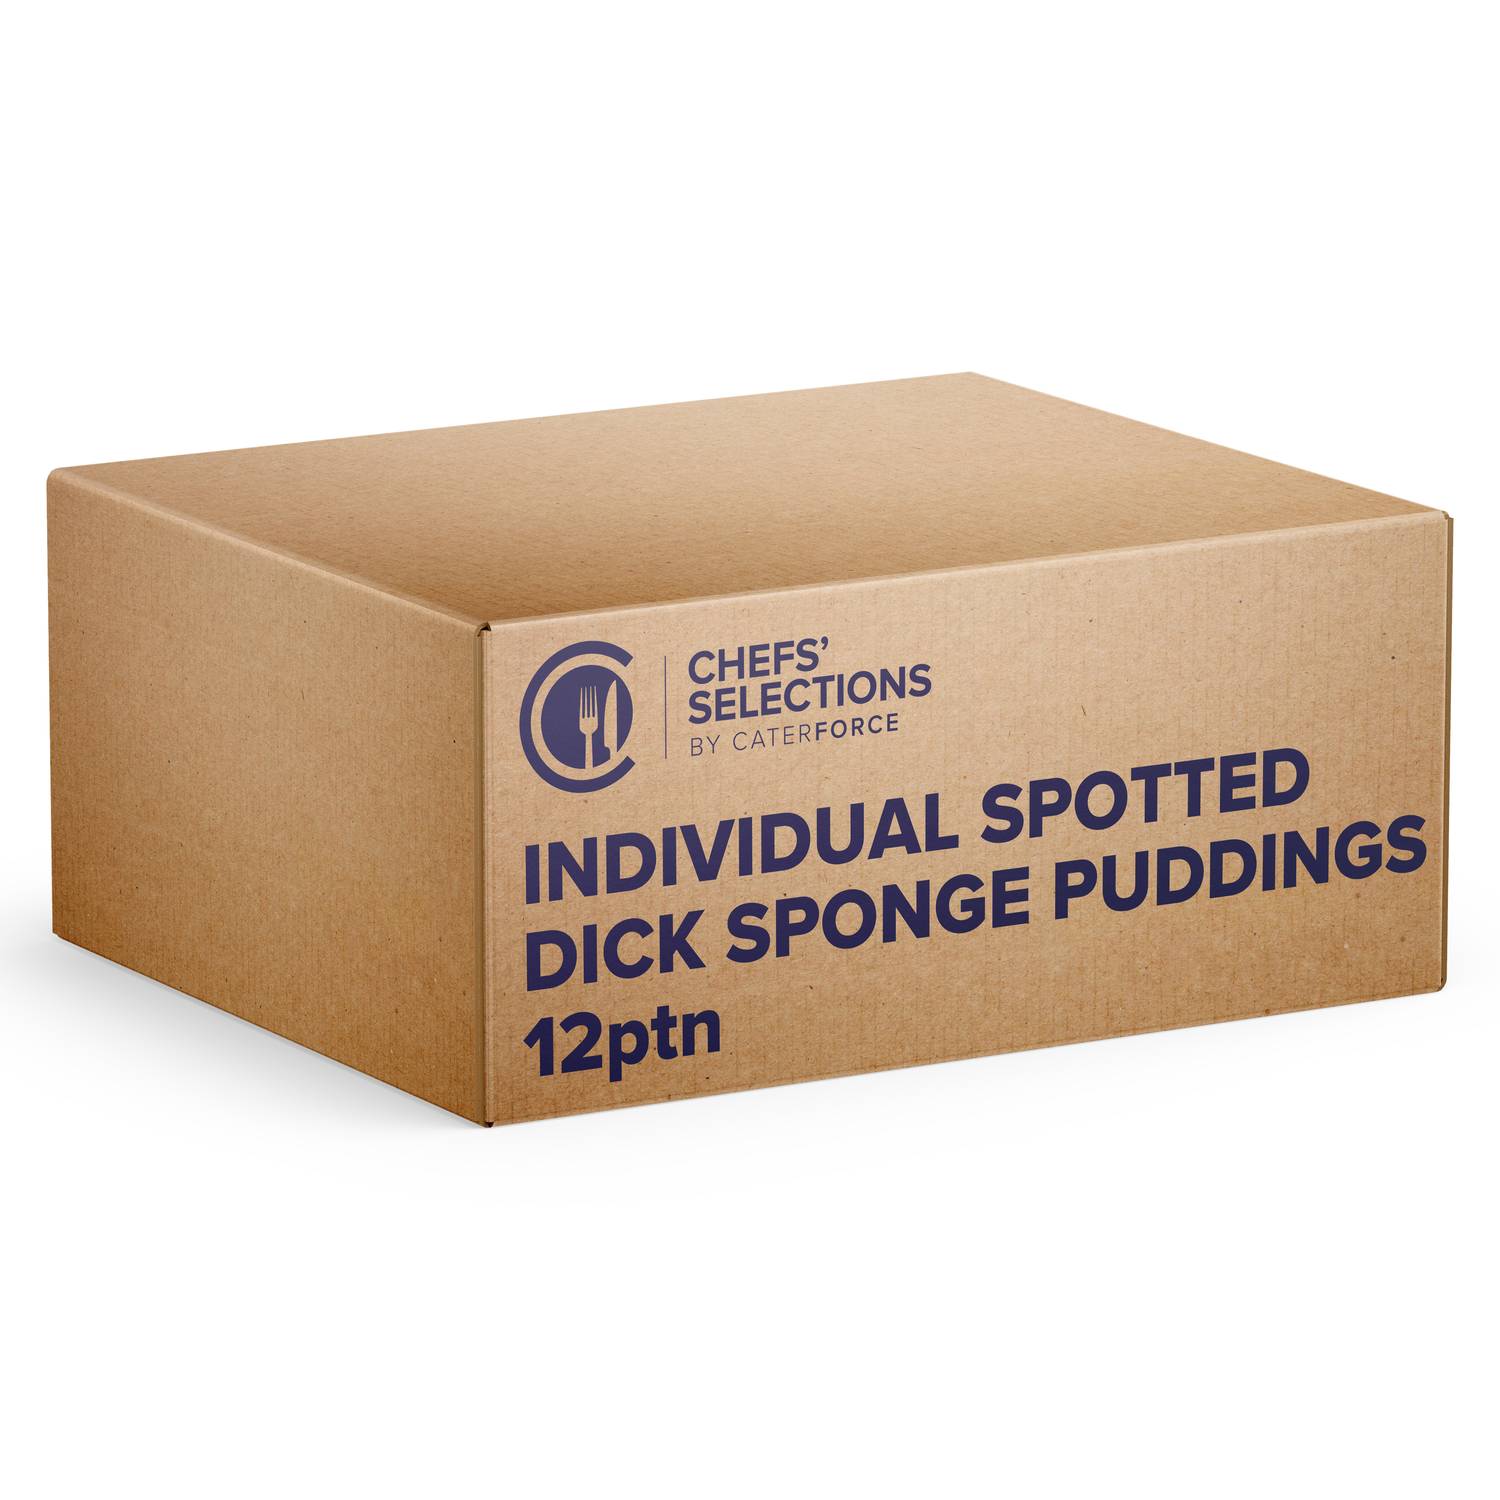 Chefs Selections Individual Spotted Dick Sponge Puddings 1 X 12ptn Caterforce